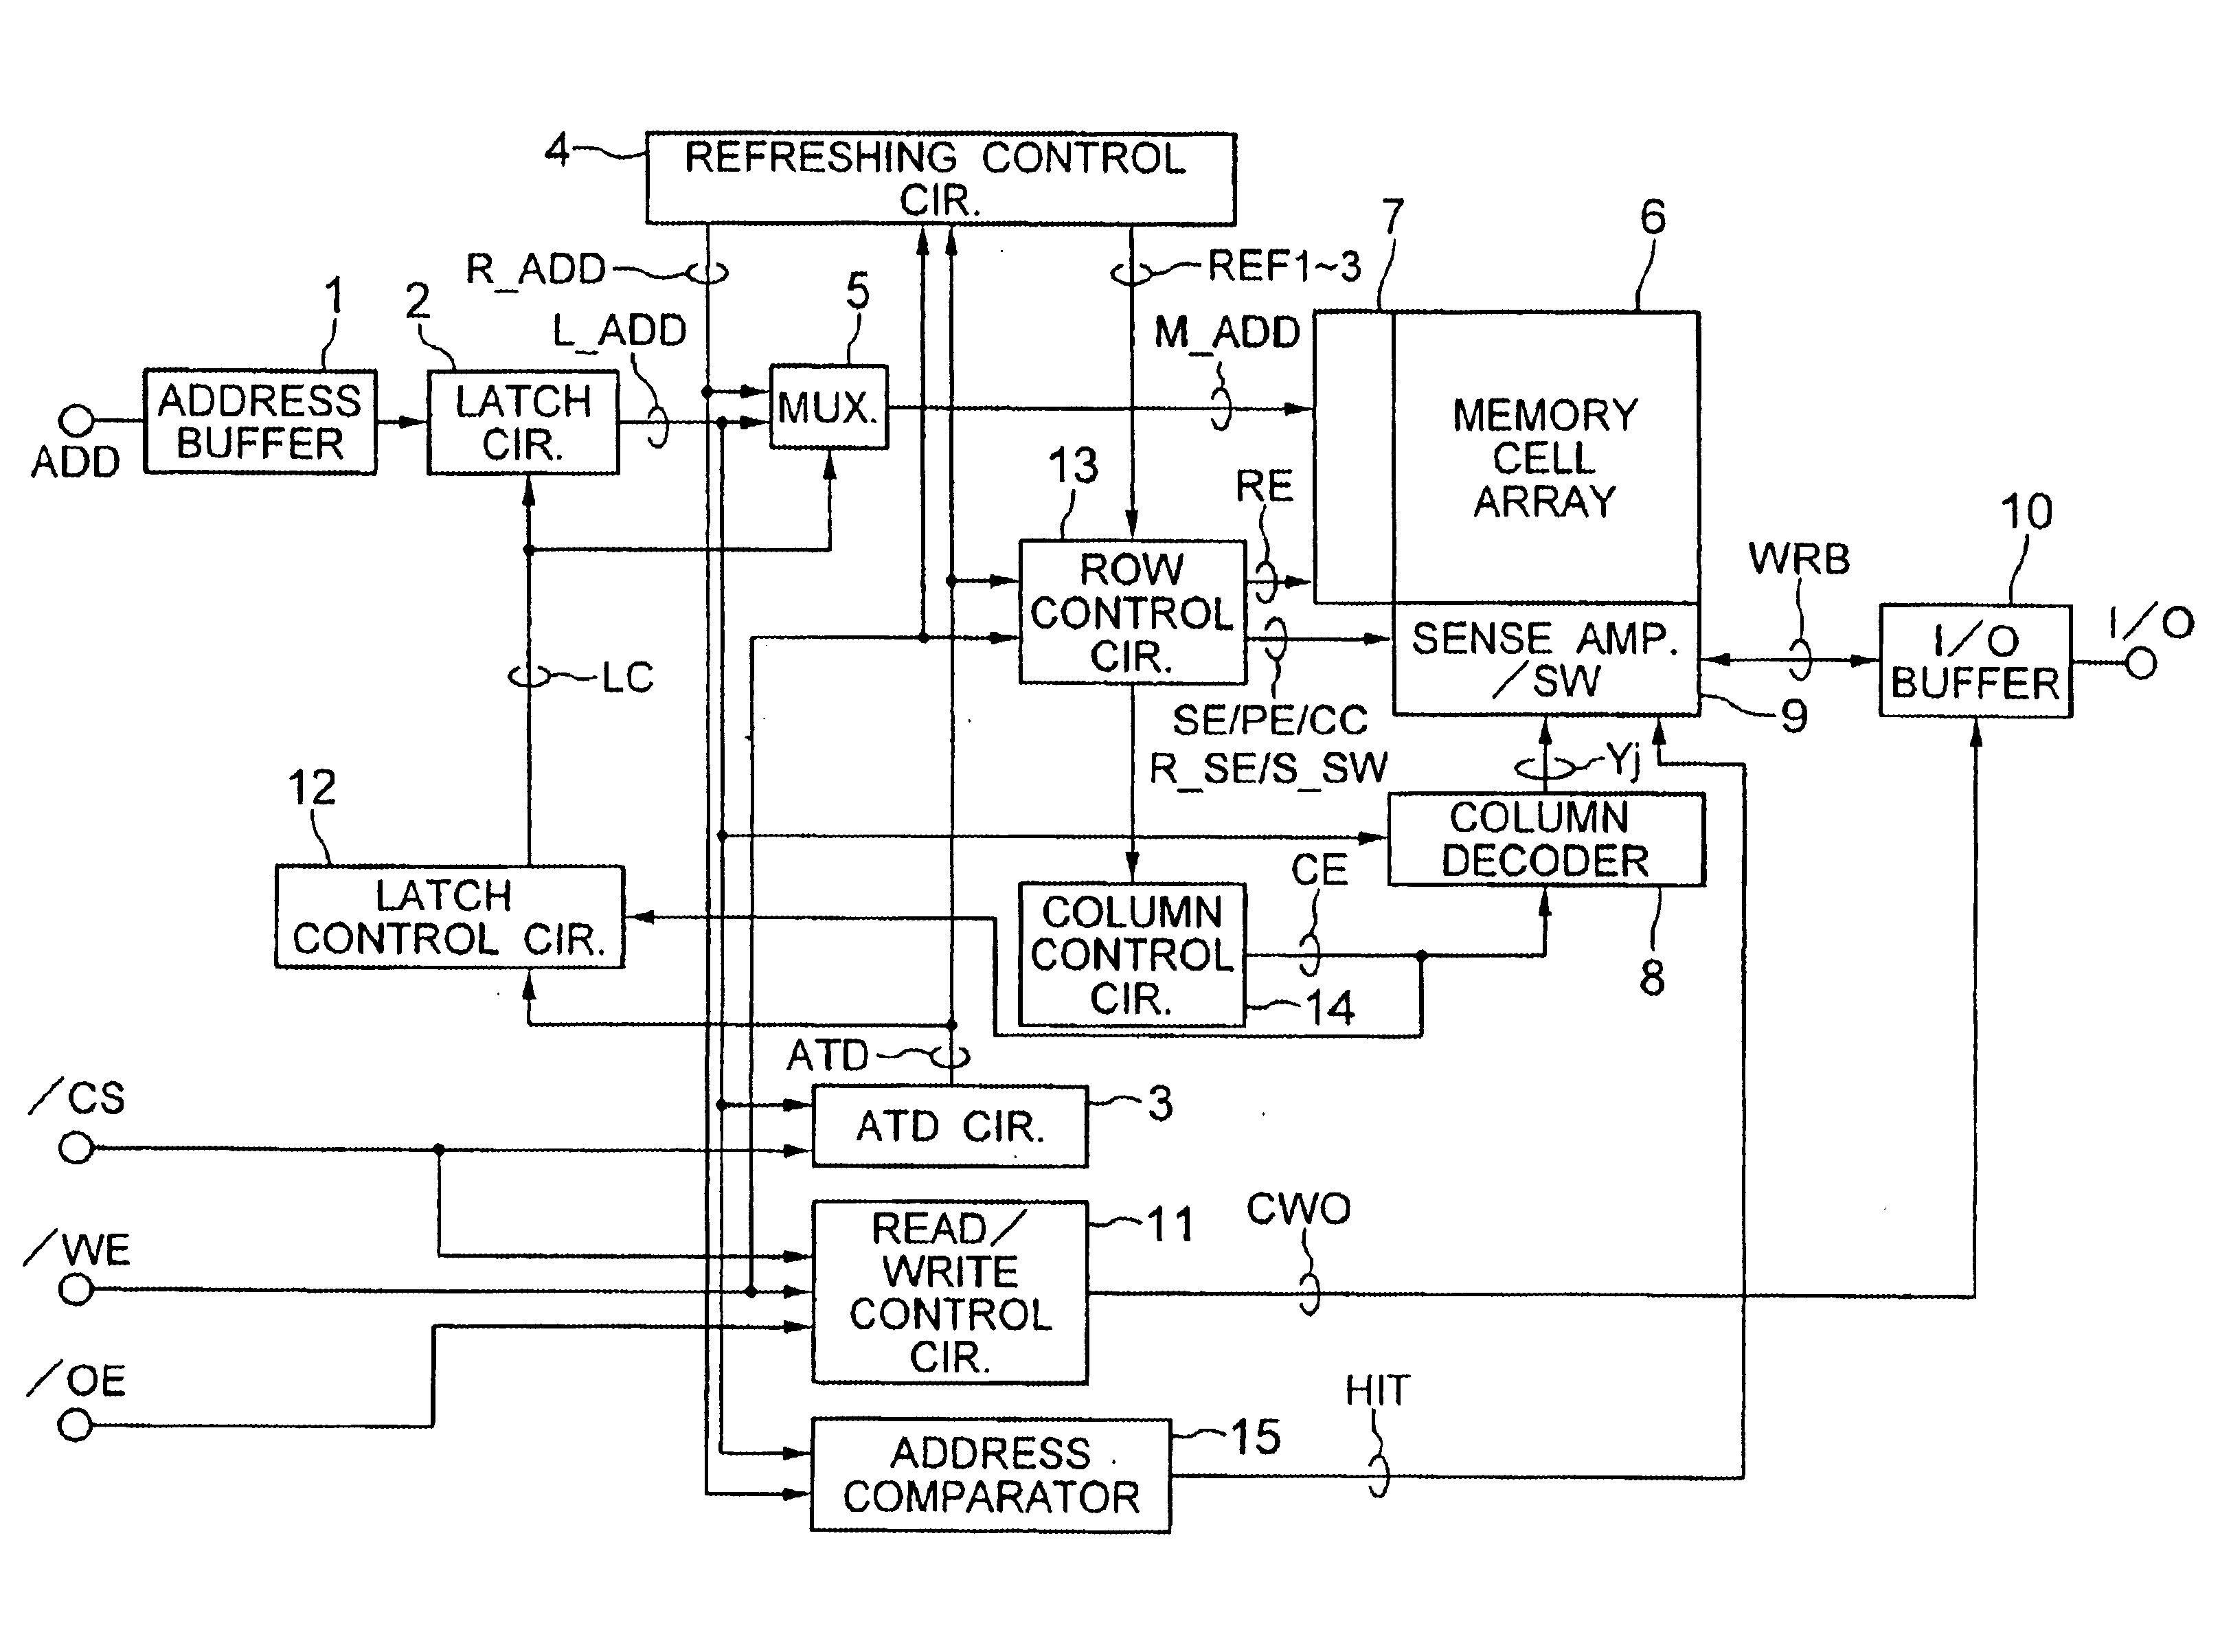 Semiconductor memory device having a DRAM cell structure and handled as a SRAM